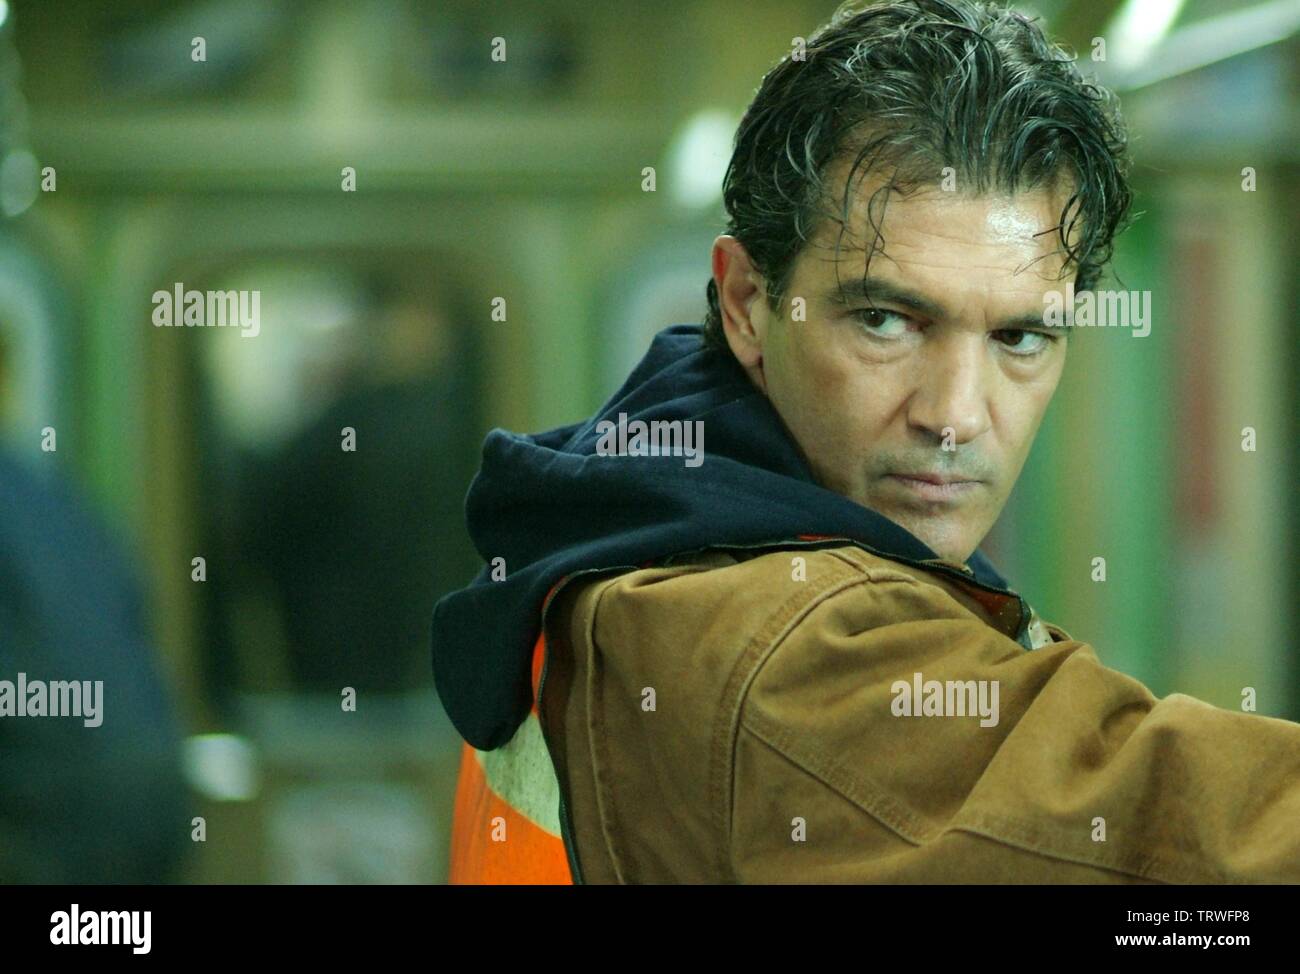 ANTONIO BANDERAS in THICK AS THIEVES (2009). Copyright: Editorial use only. No merchandising or book covers. This is a publicly distributed handout. Access rights only, no license of copyright provided. Only to be reproduced in conjunction with promotion of this film. Credit: MILLENNIUM FILMS / Album Stock Photo